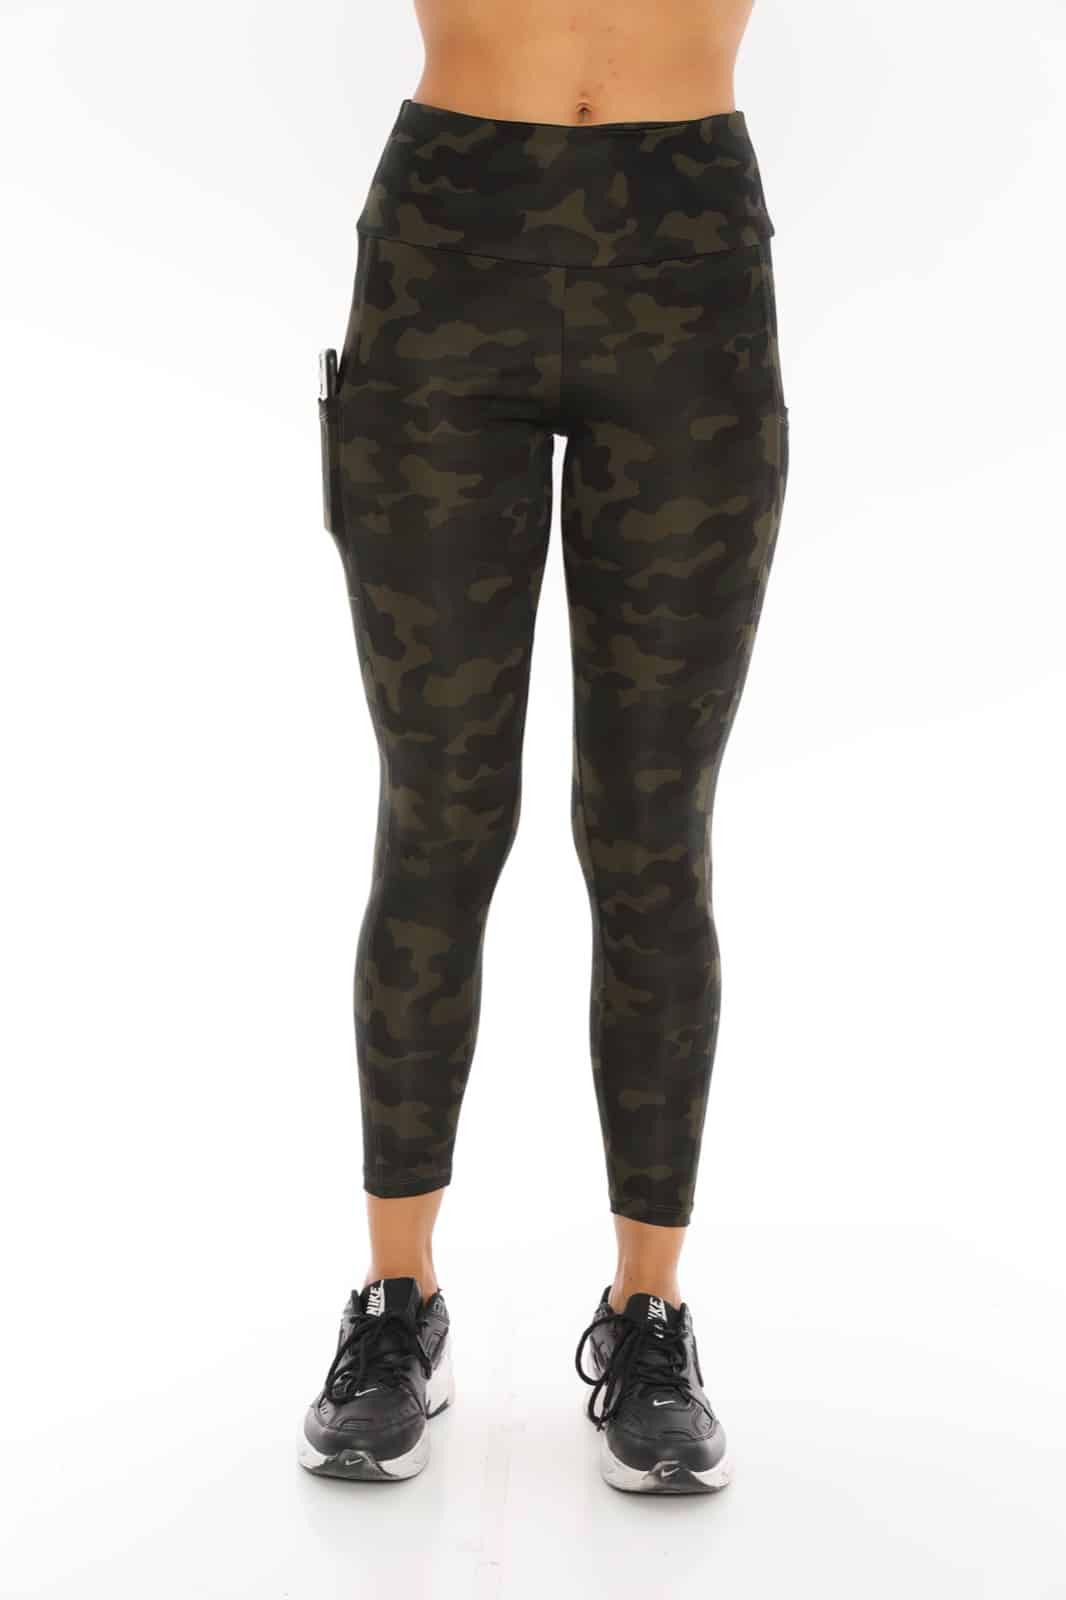 Activewear High Waisted Camo Print Yoga Pants with Black Side Stripe and  Mesh Pockets - Its All Leggings